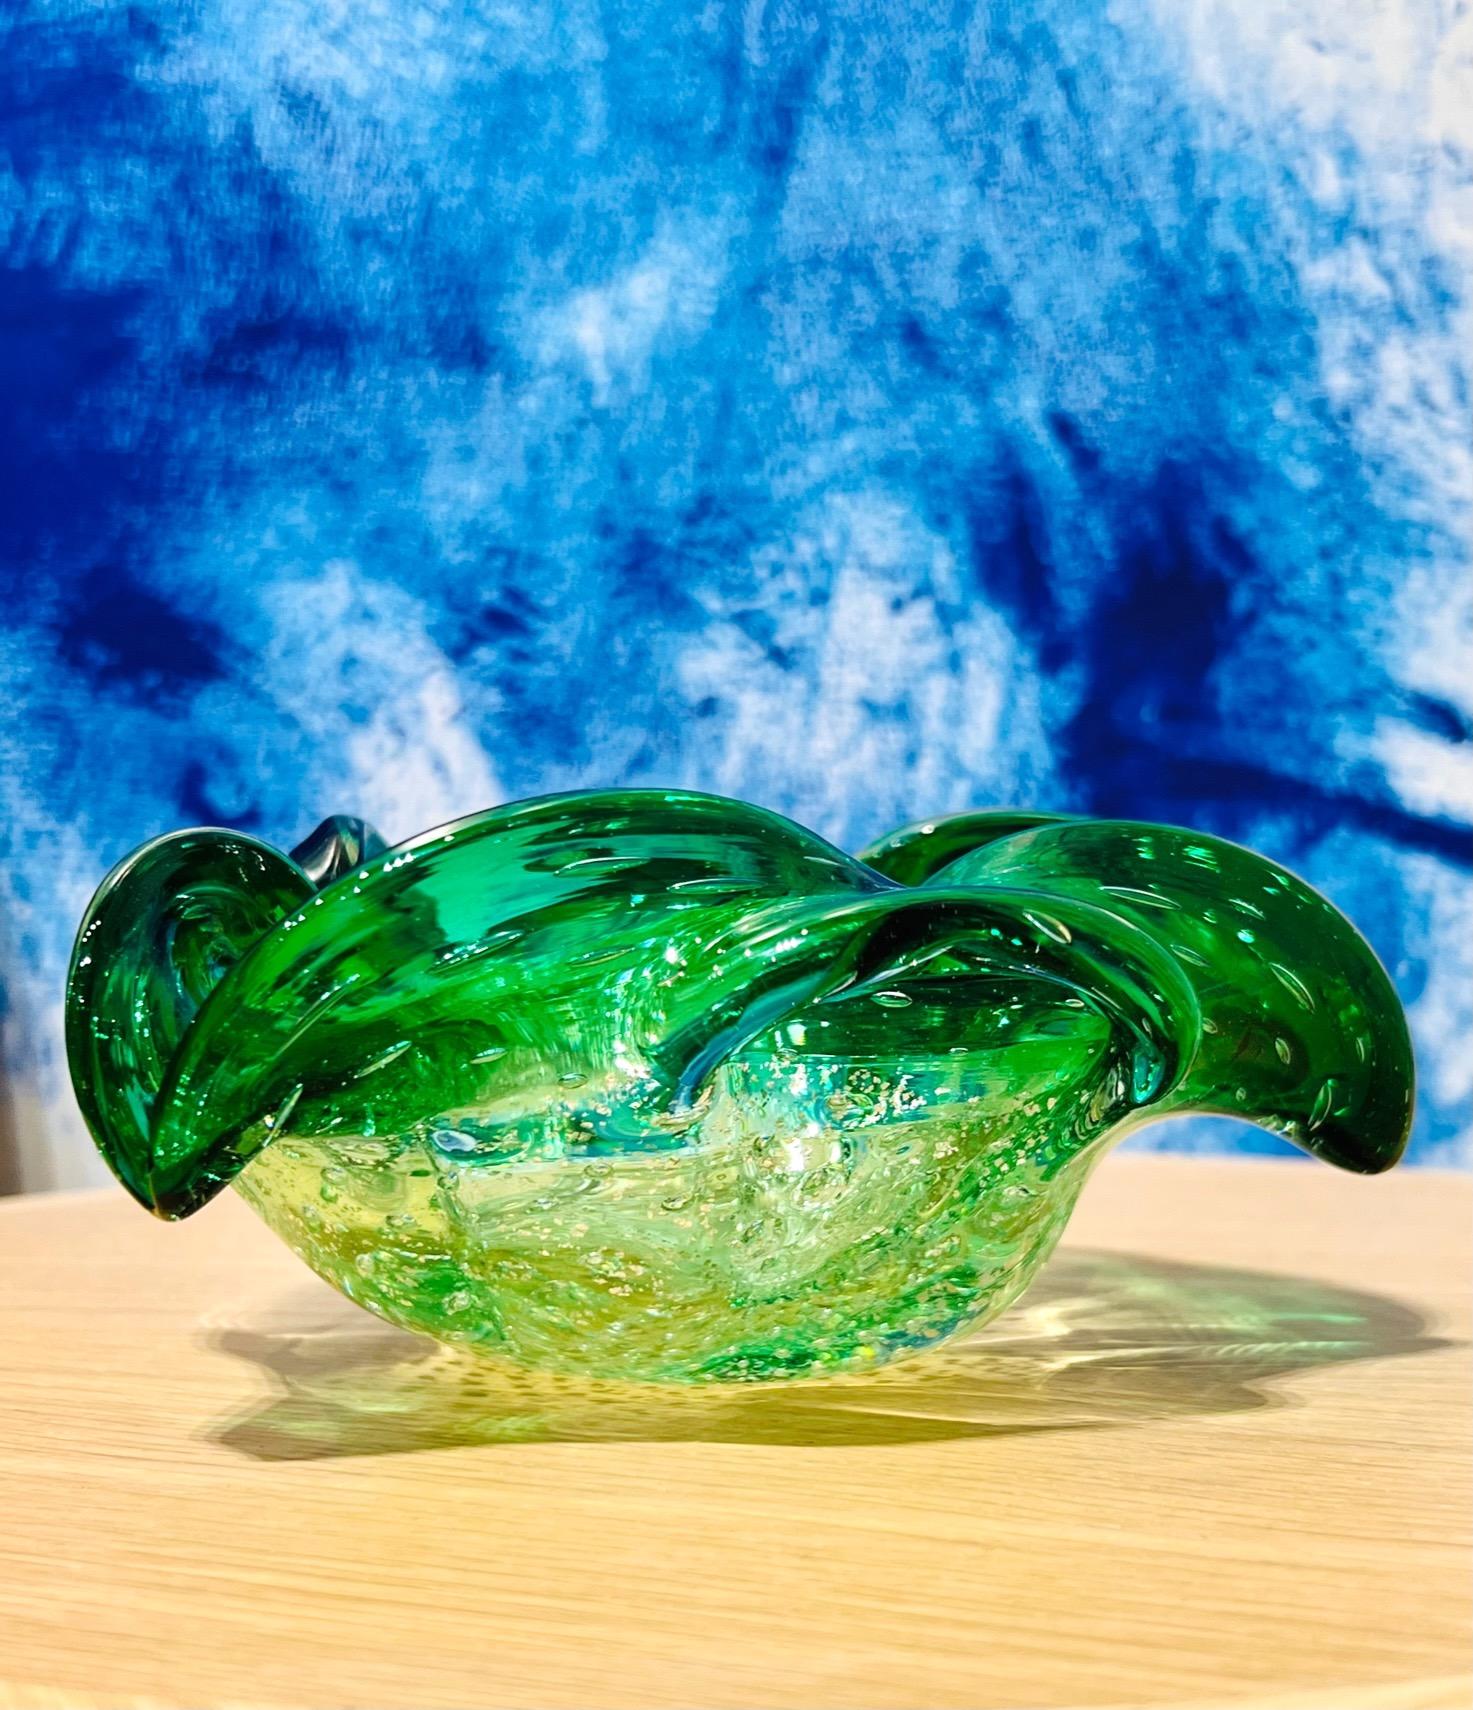 Mid-Century Modern Emerald Green Murano Bowl or Ashtray with Gold Leaf Accents, Italy c. 1950s